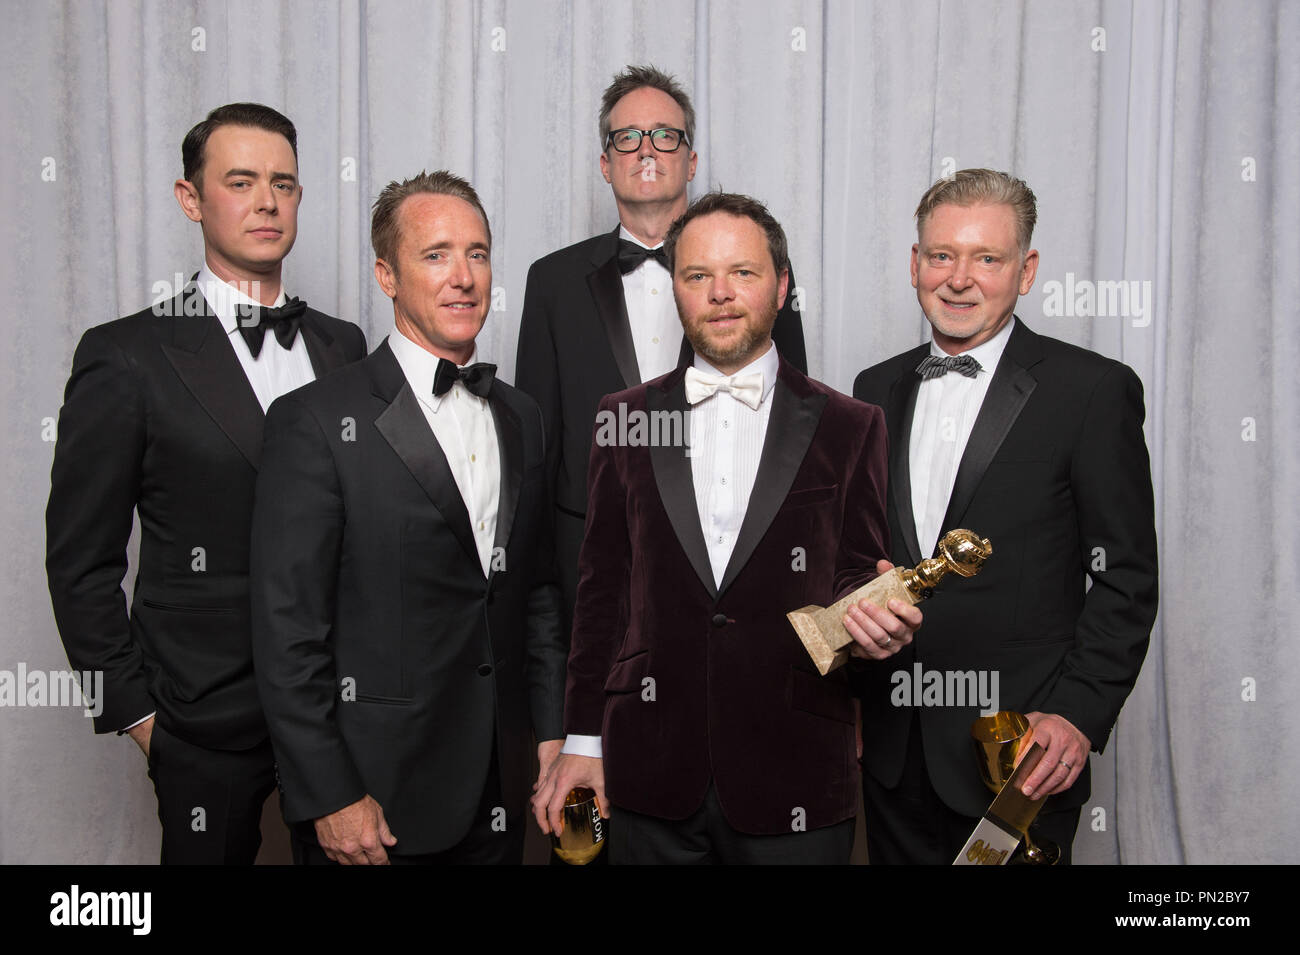 For BEST MINI-SERIES OR MOTION PICTURE MADE FOR TELEVISION, the Golden Globe is awarded to “FARGO” (FX), produced by FX Productions & MGM Television. Noah Hawley and the Producers pose with the award backstage in the press room at the 72nd Annual Golden Globe Awards at the Beverly Hilton in Beverly Hills, CA on Sunday, January 11, 2015.  File Reference # 32536 252JRC  For Editorial Use Only -  All Rights Reserved Stock Photo